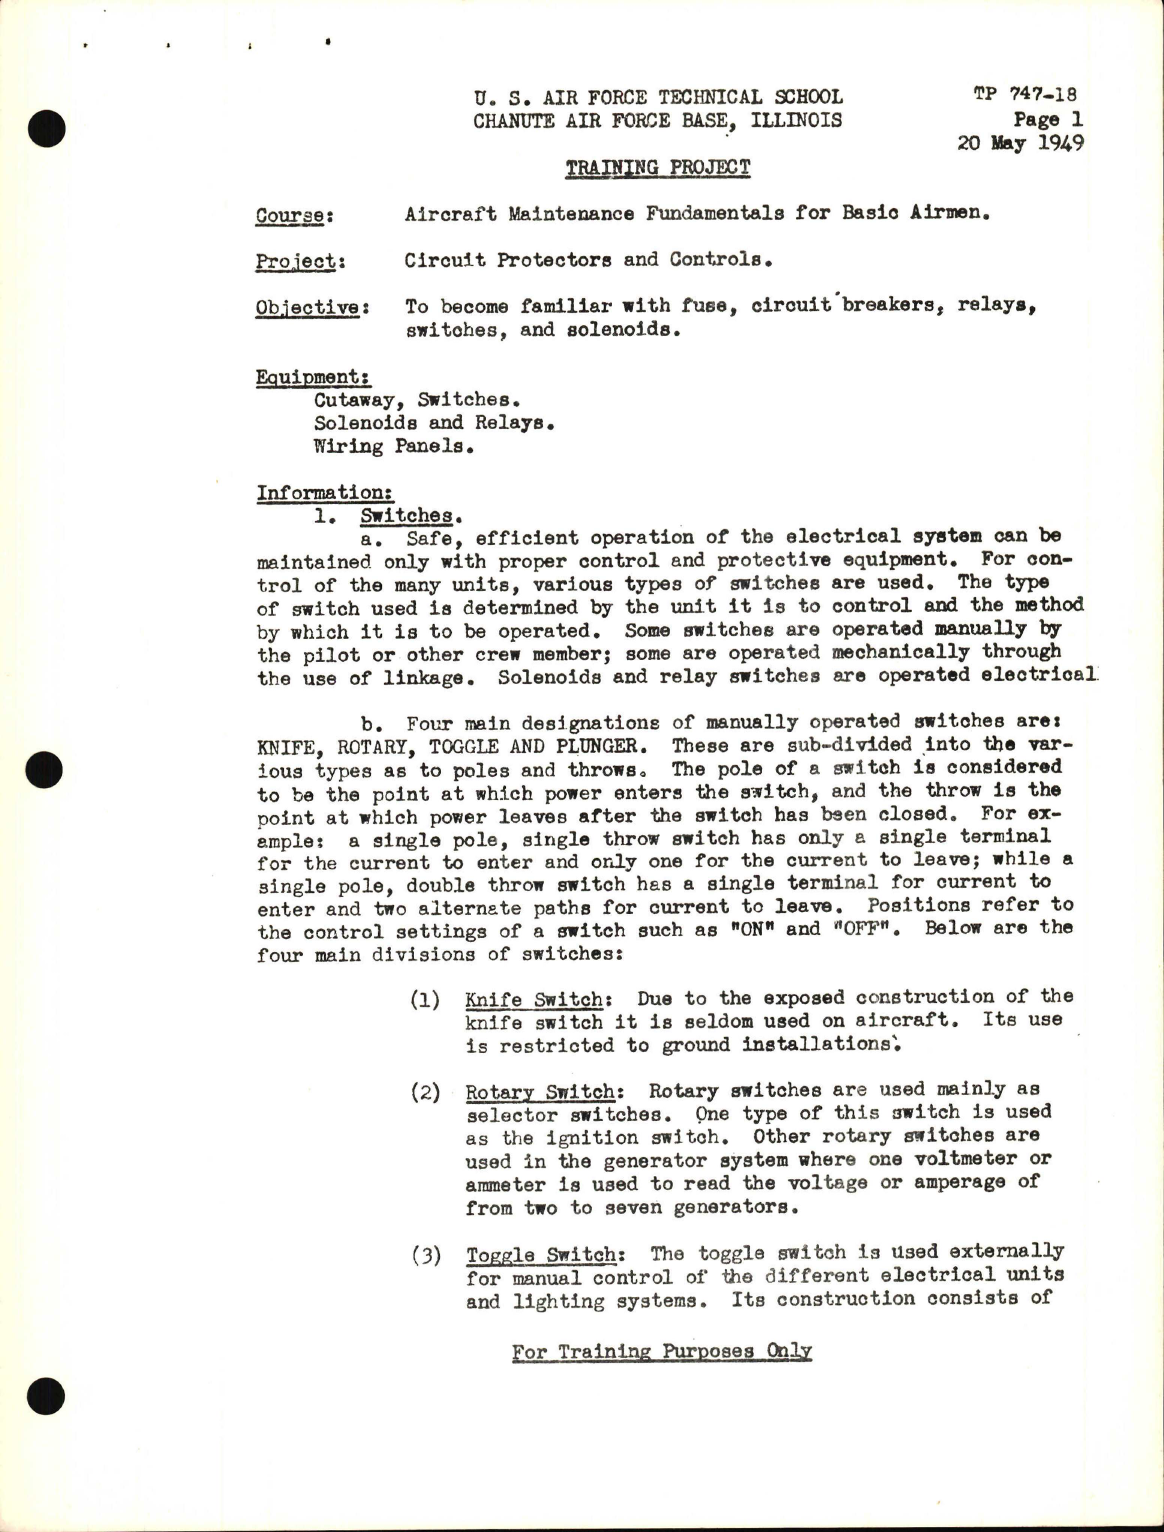 Sample page 1 from AirCorps Library document: Training Project, Circuit Protectors and Controls